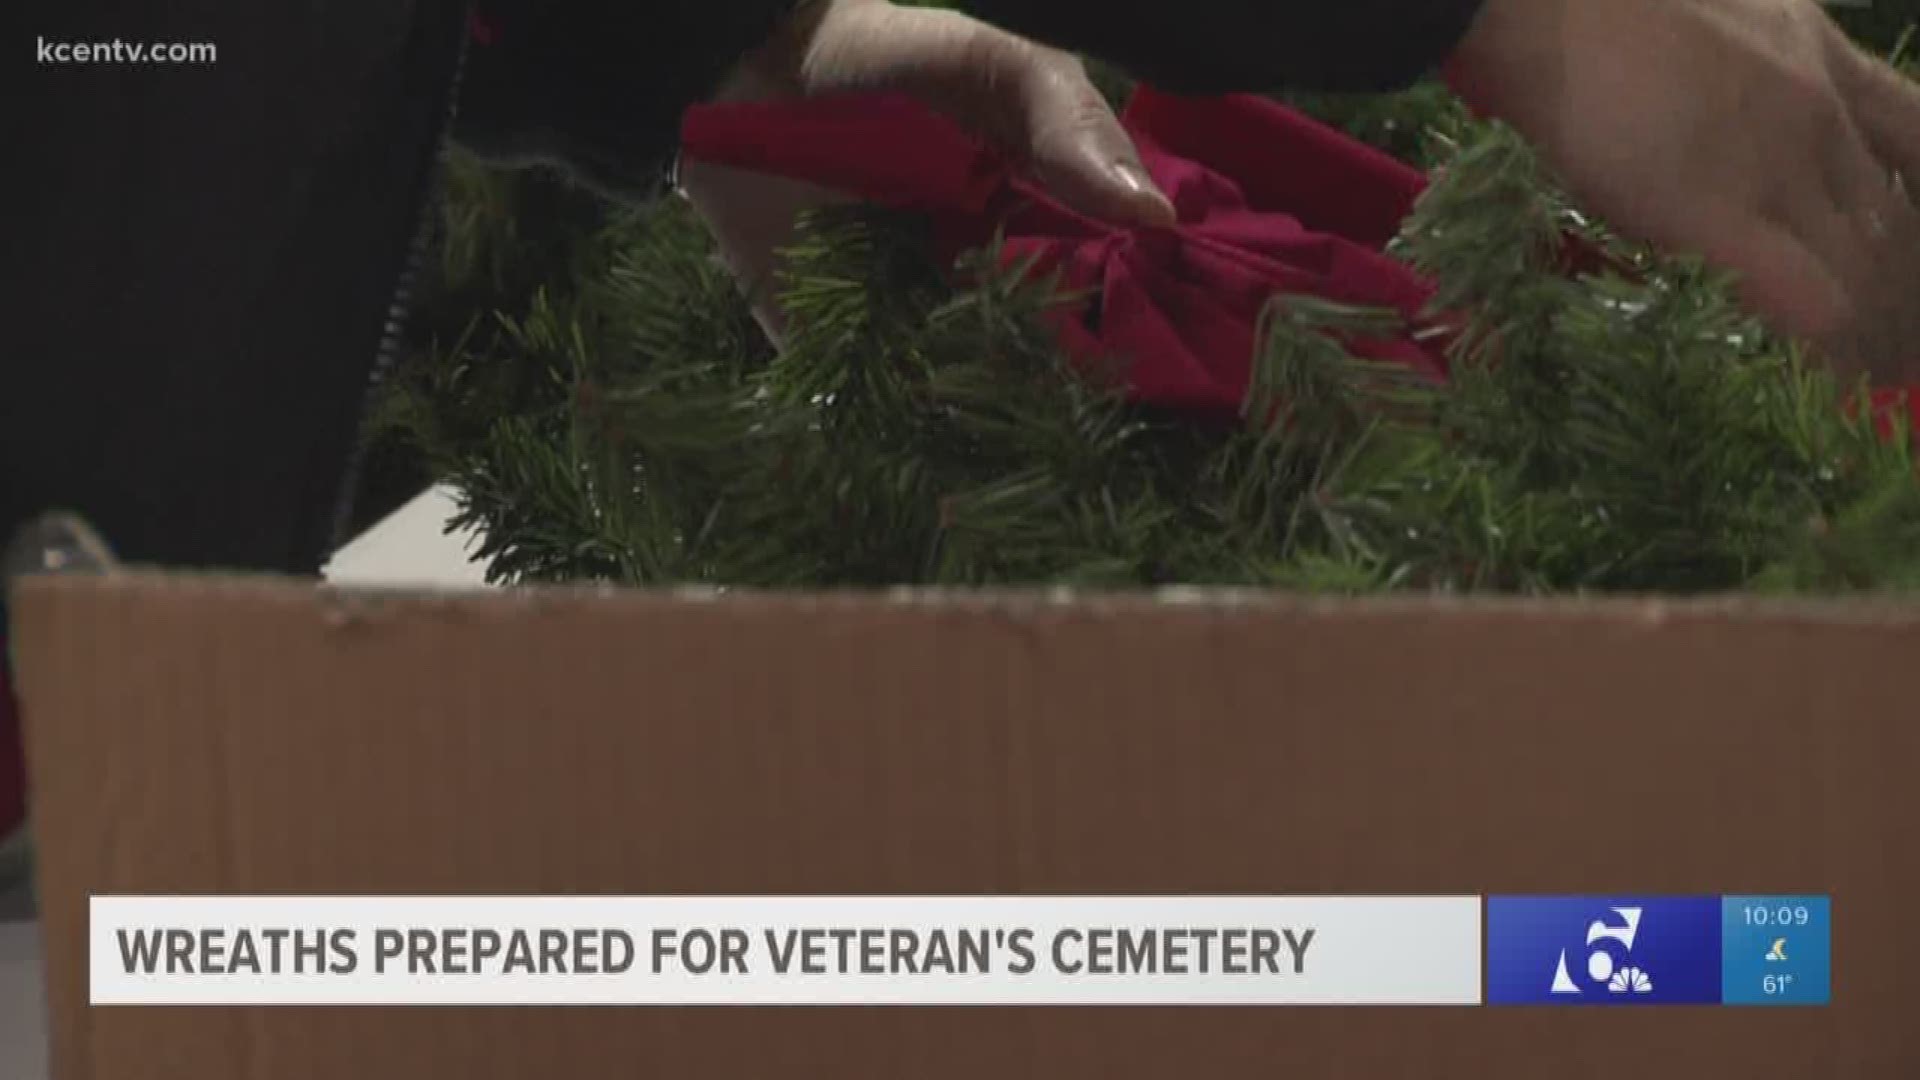 Hundreds of people filled the Killeen Special Events Center Saturday morning to prepare wreaths to honor veterans.